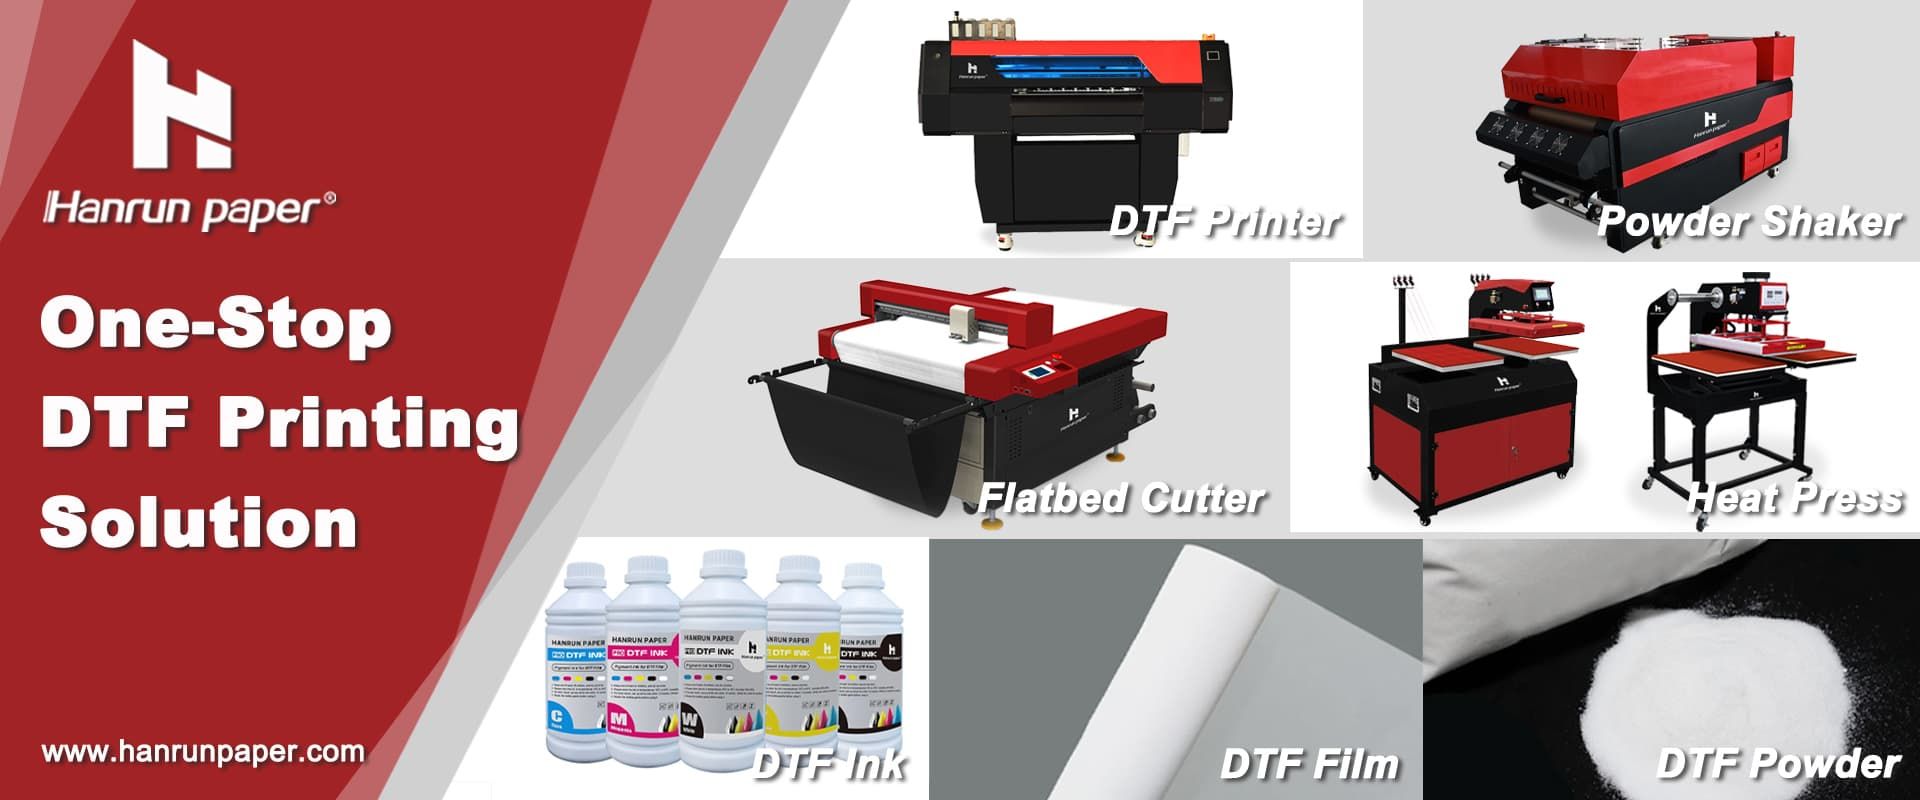 New DTF Paper  Hanrun paper DTF Printing Solutions 